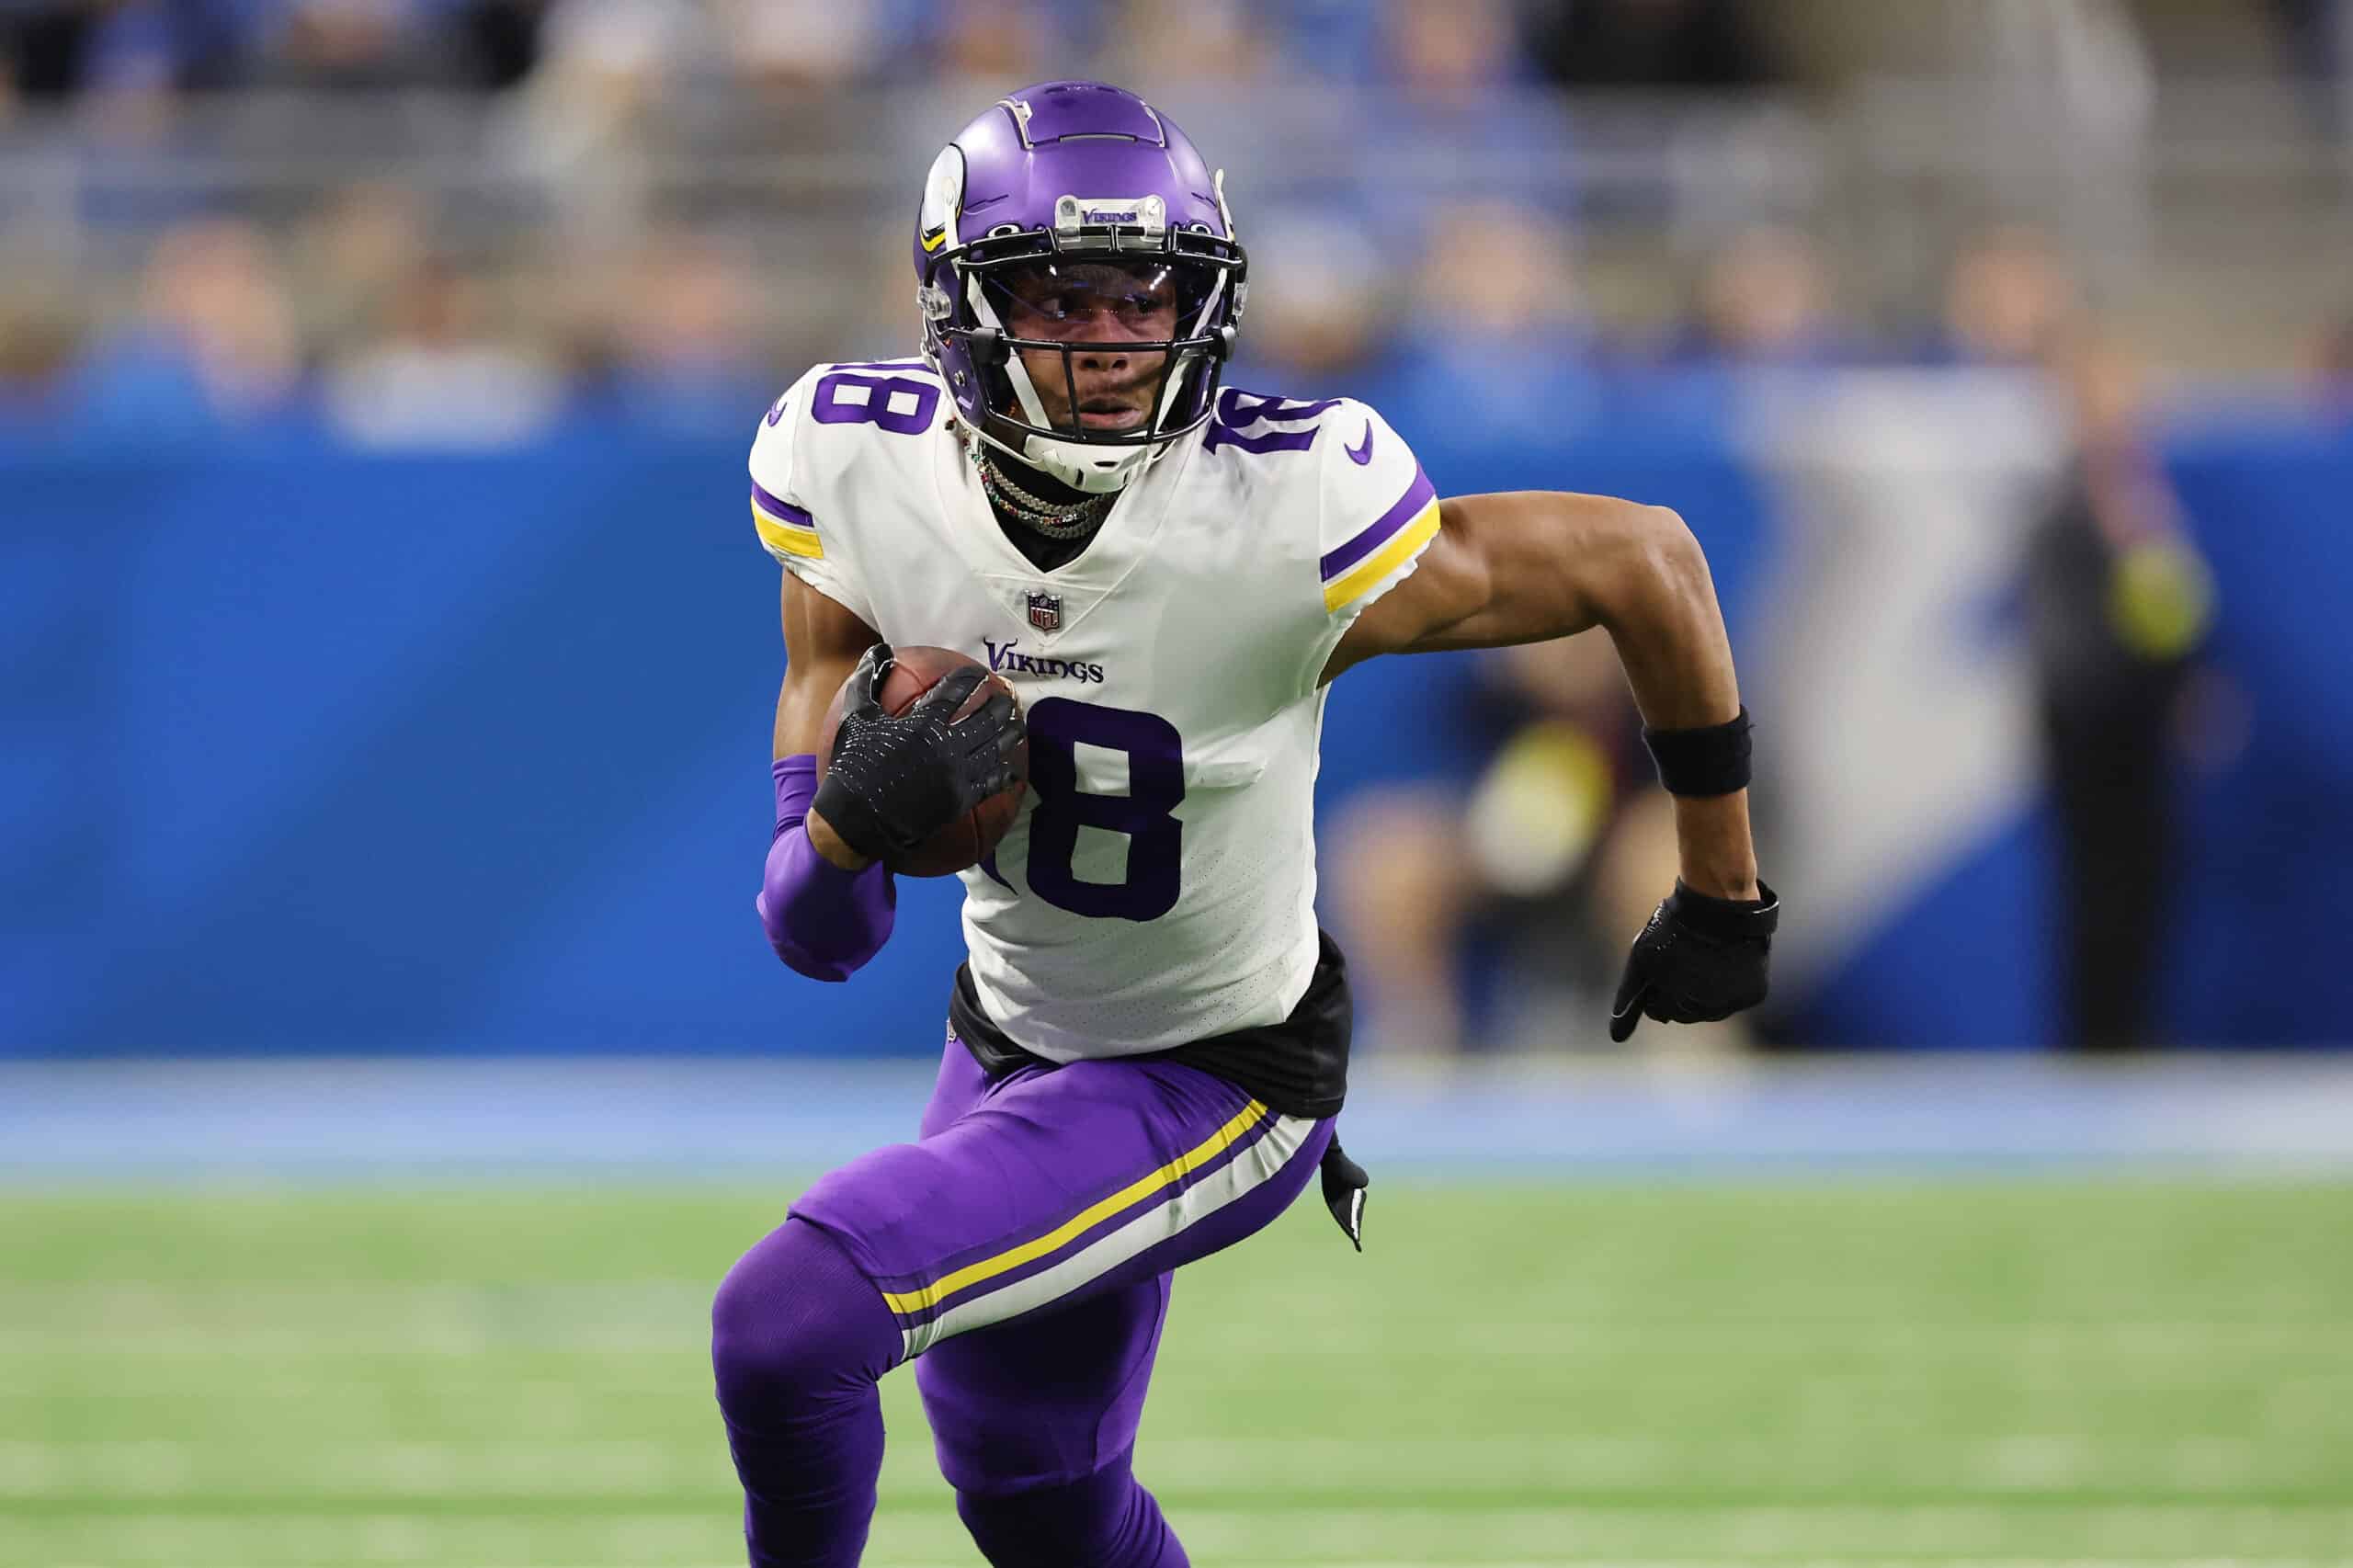 Minnesota Vikings' Bold Strategy: Eyeing a Top Draft Pick in a High-Stakes NFL Gamble